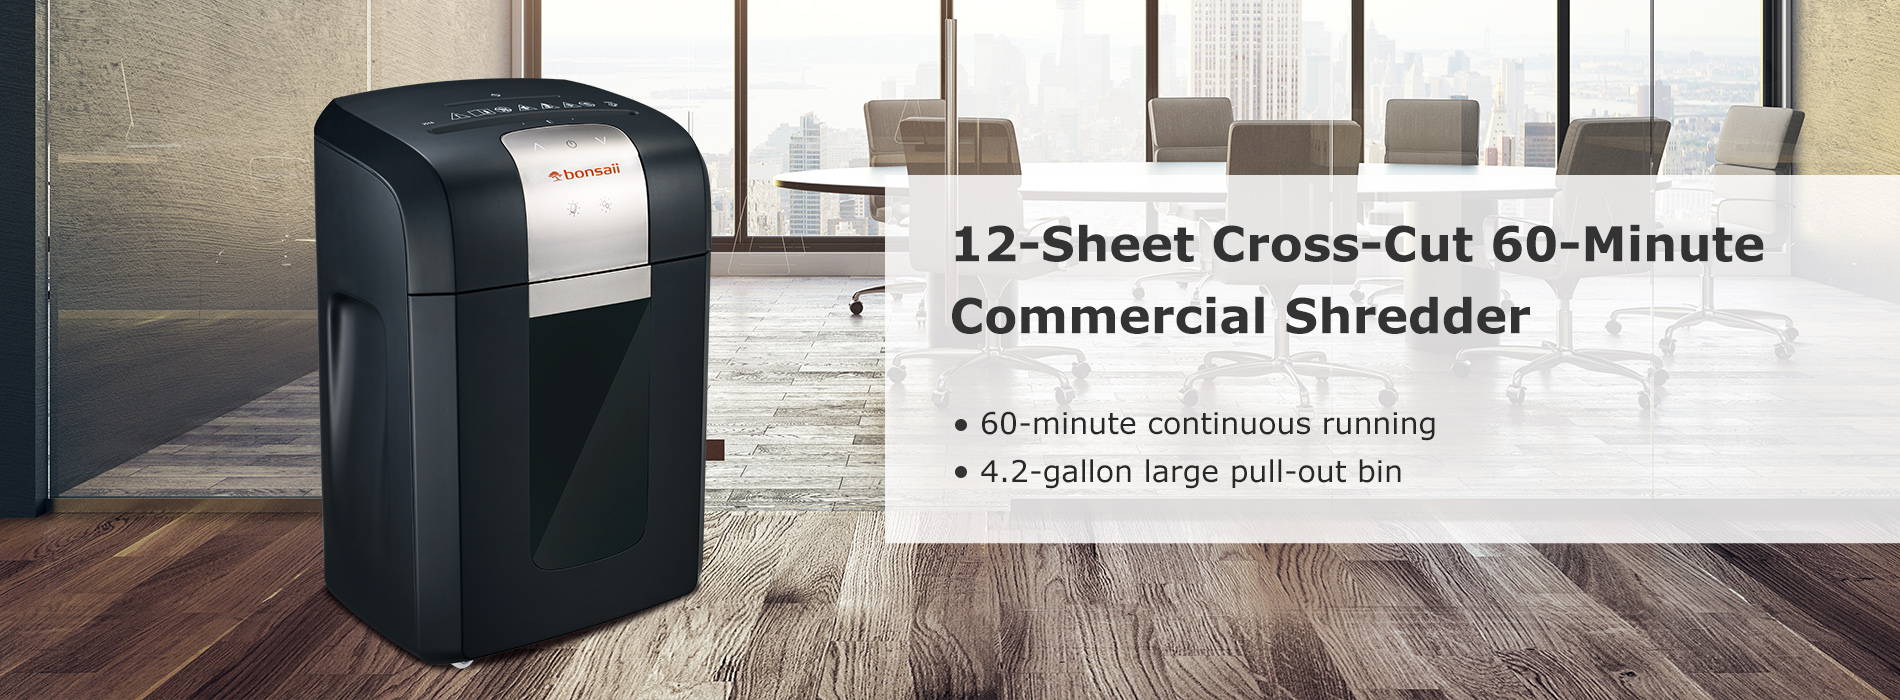 12-Sheet Cross-Cut 60-Minute Commercial Shredder  60-minute continuous running      4.2-gallon large pull-out bin 